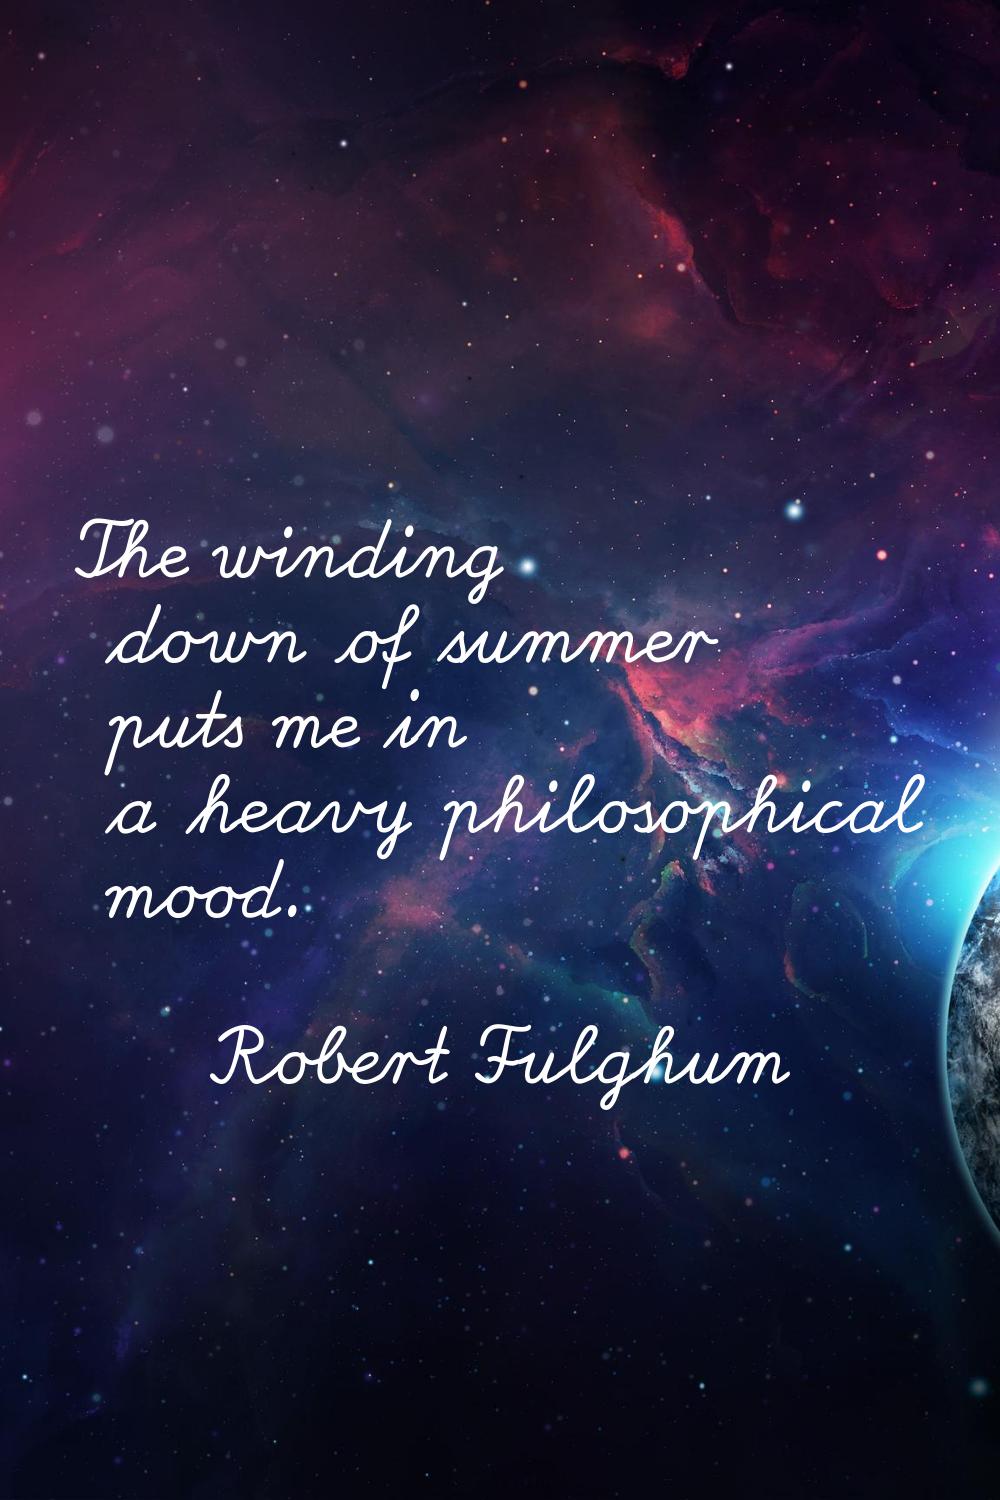 The winding down of summer puts me in a heavy philosophical mood.